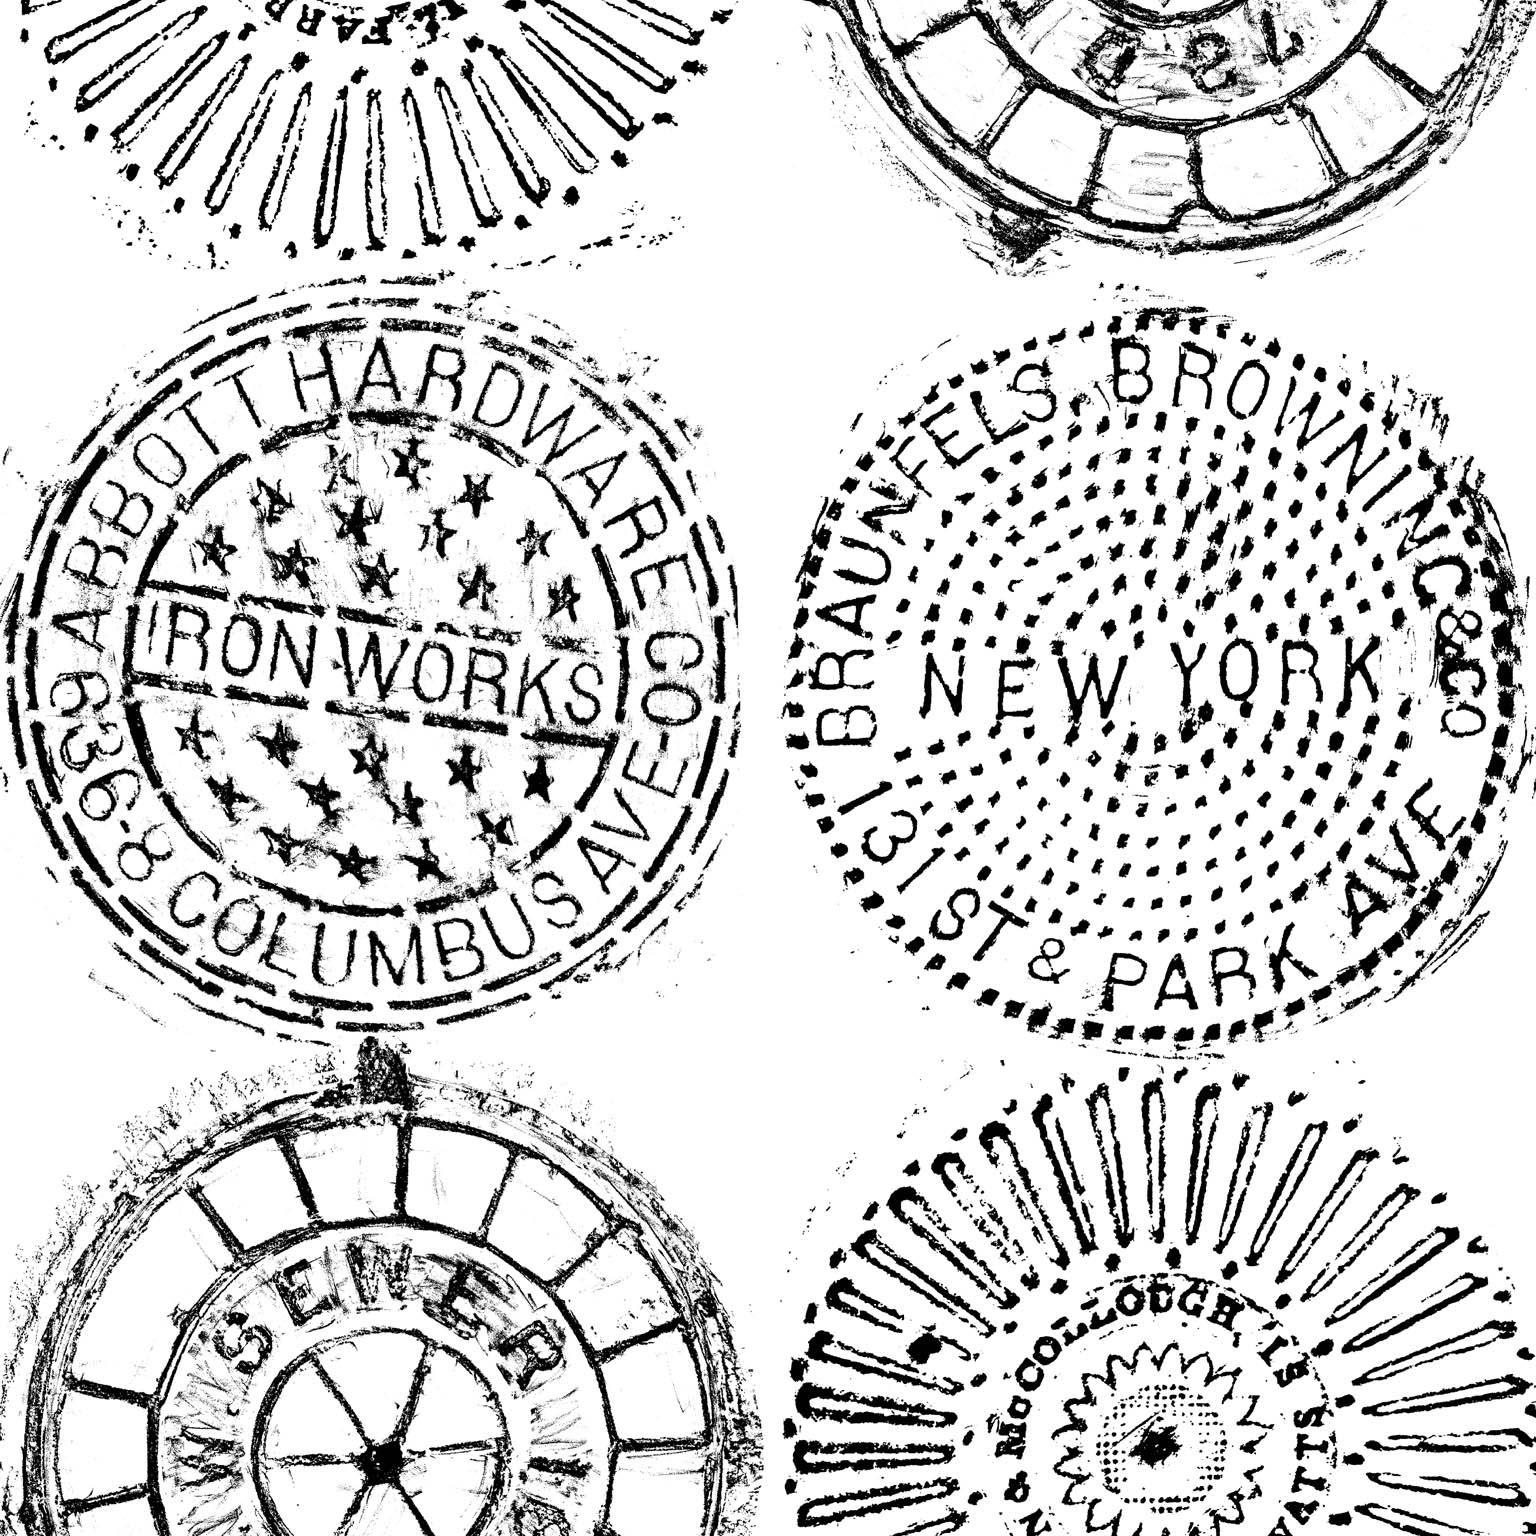 NYC Manhole Printed Wallpaper, Black on White Manhole Cover For Sale